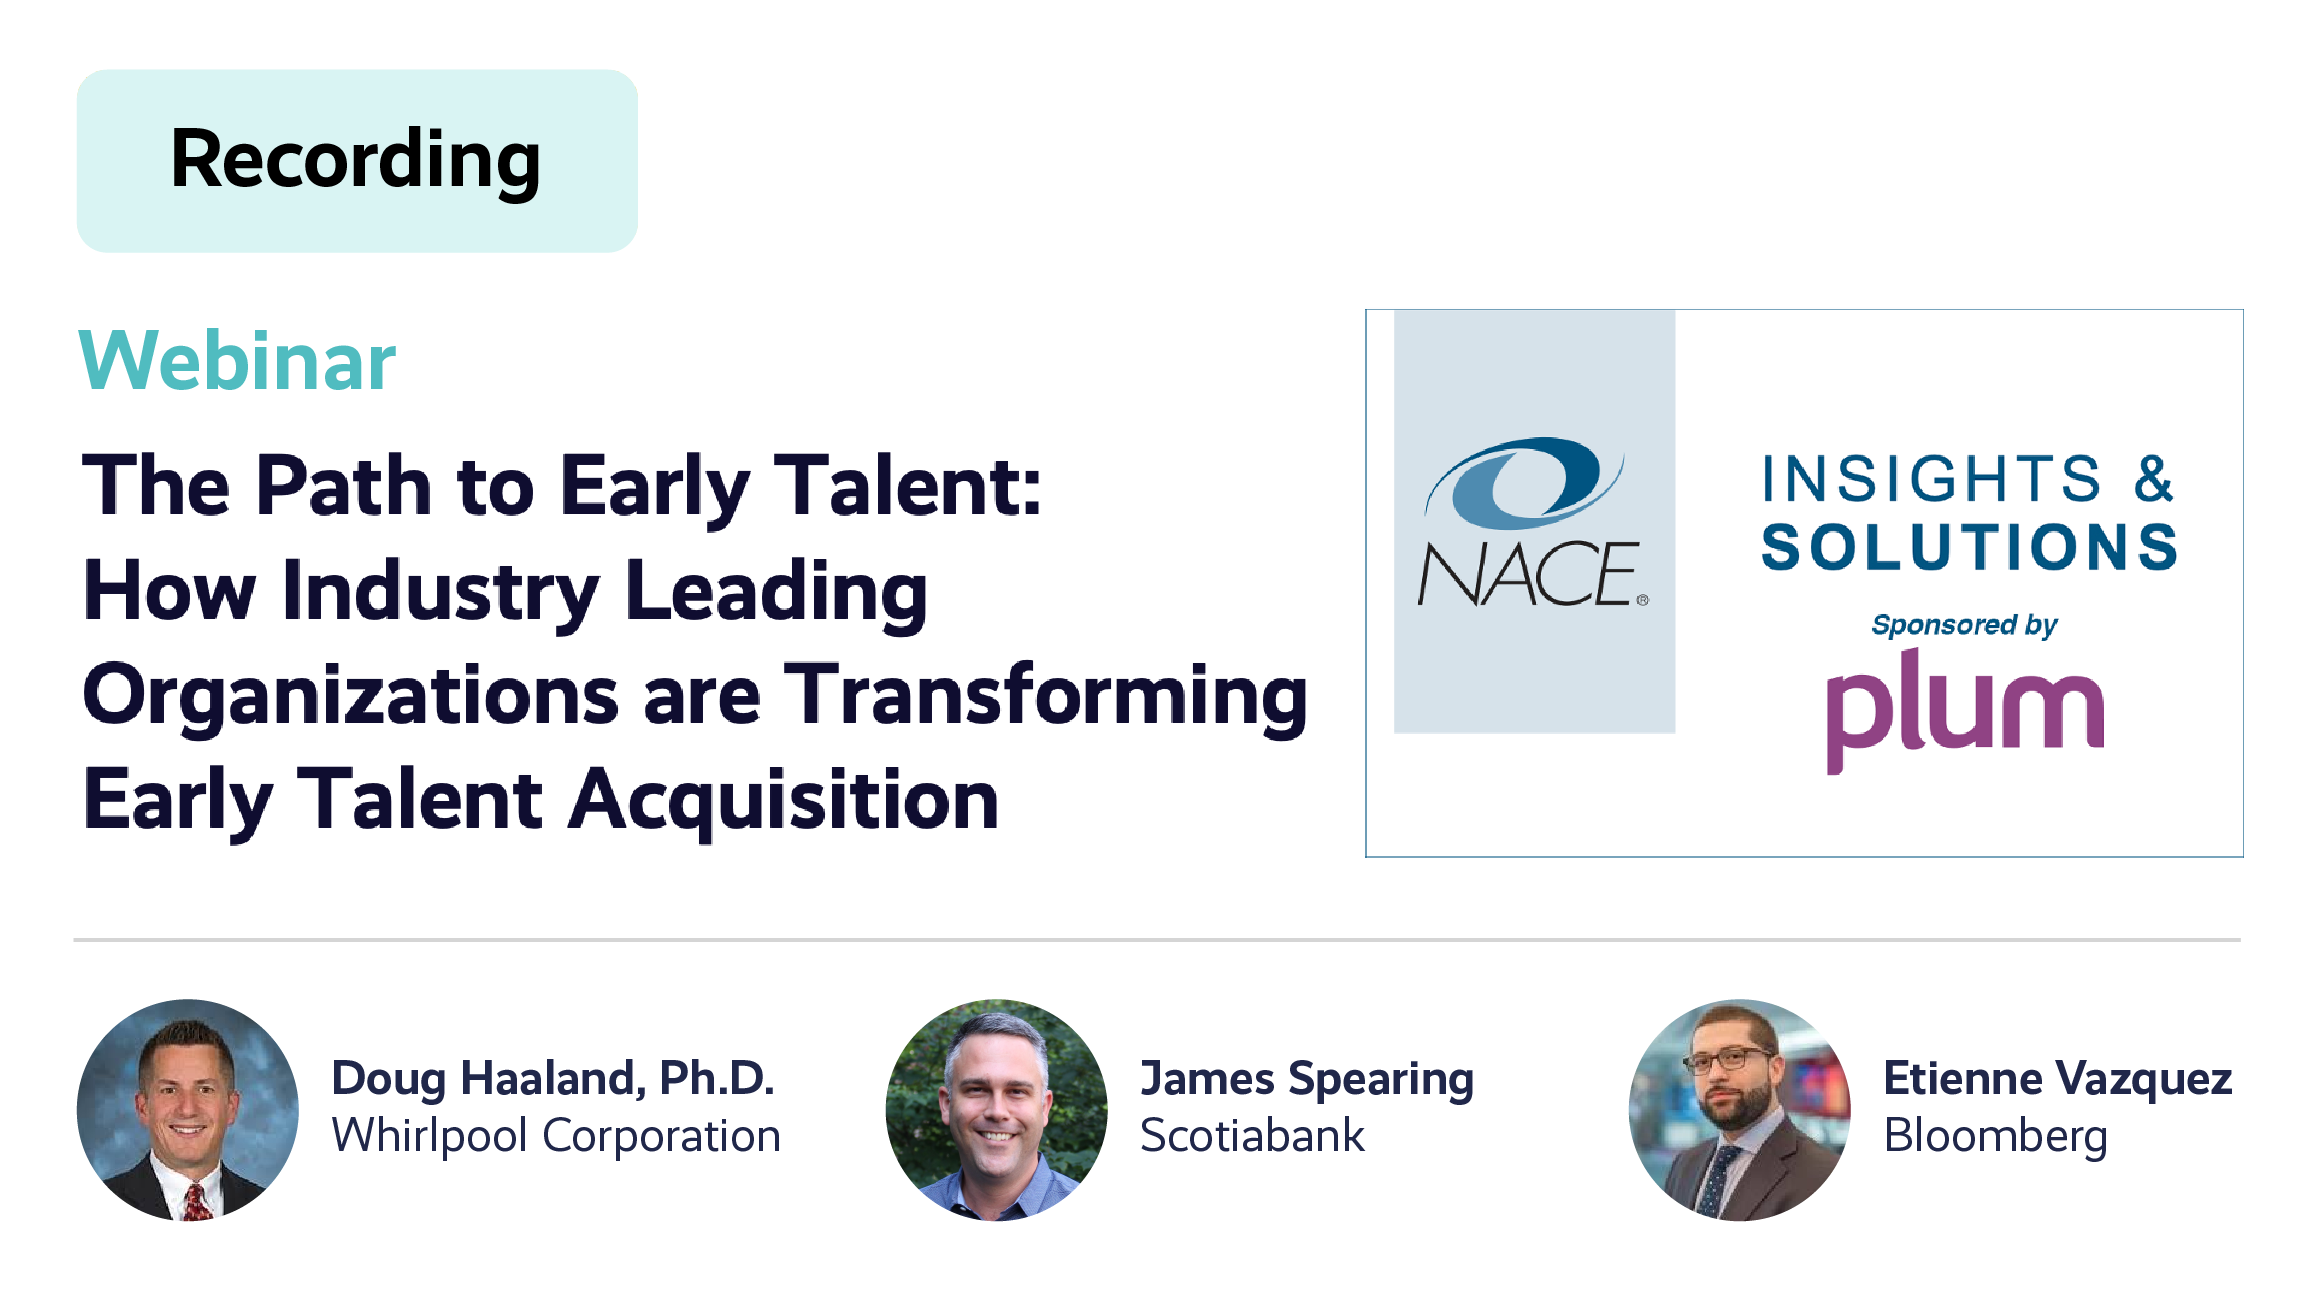 The Path to Early Talent: How Industry Leading Organizations are Transforming Early Talent Acquisition